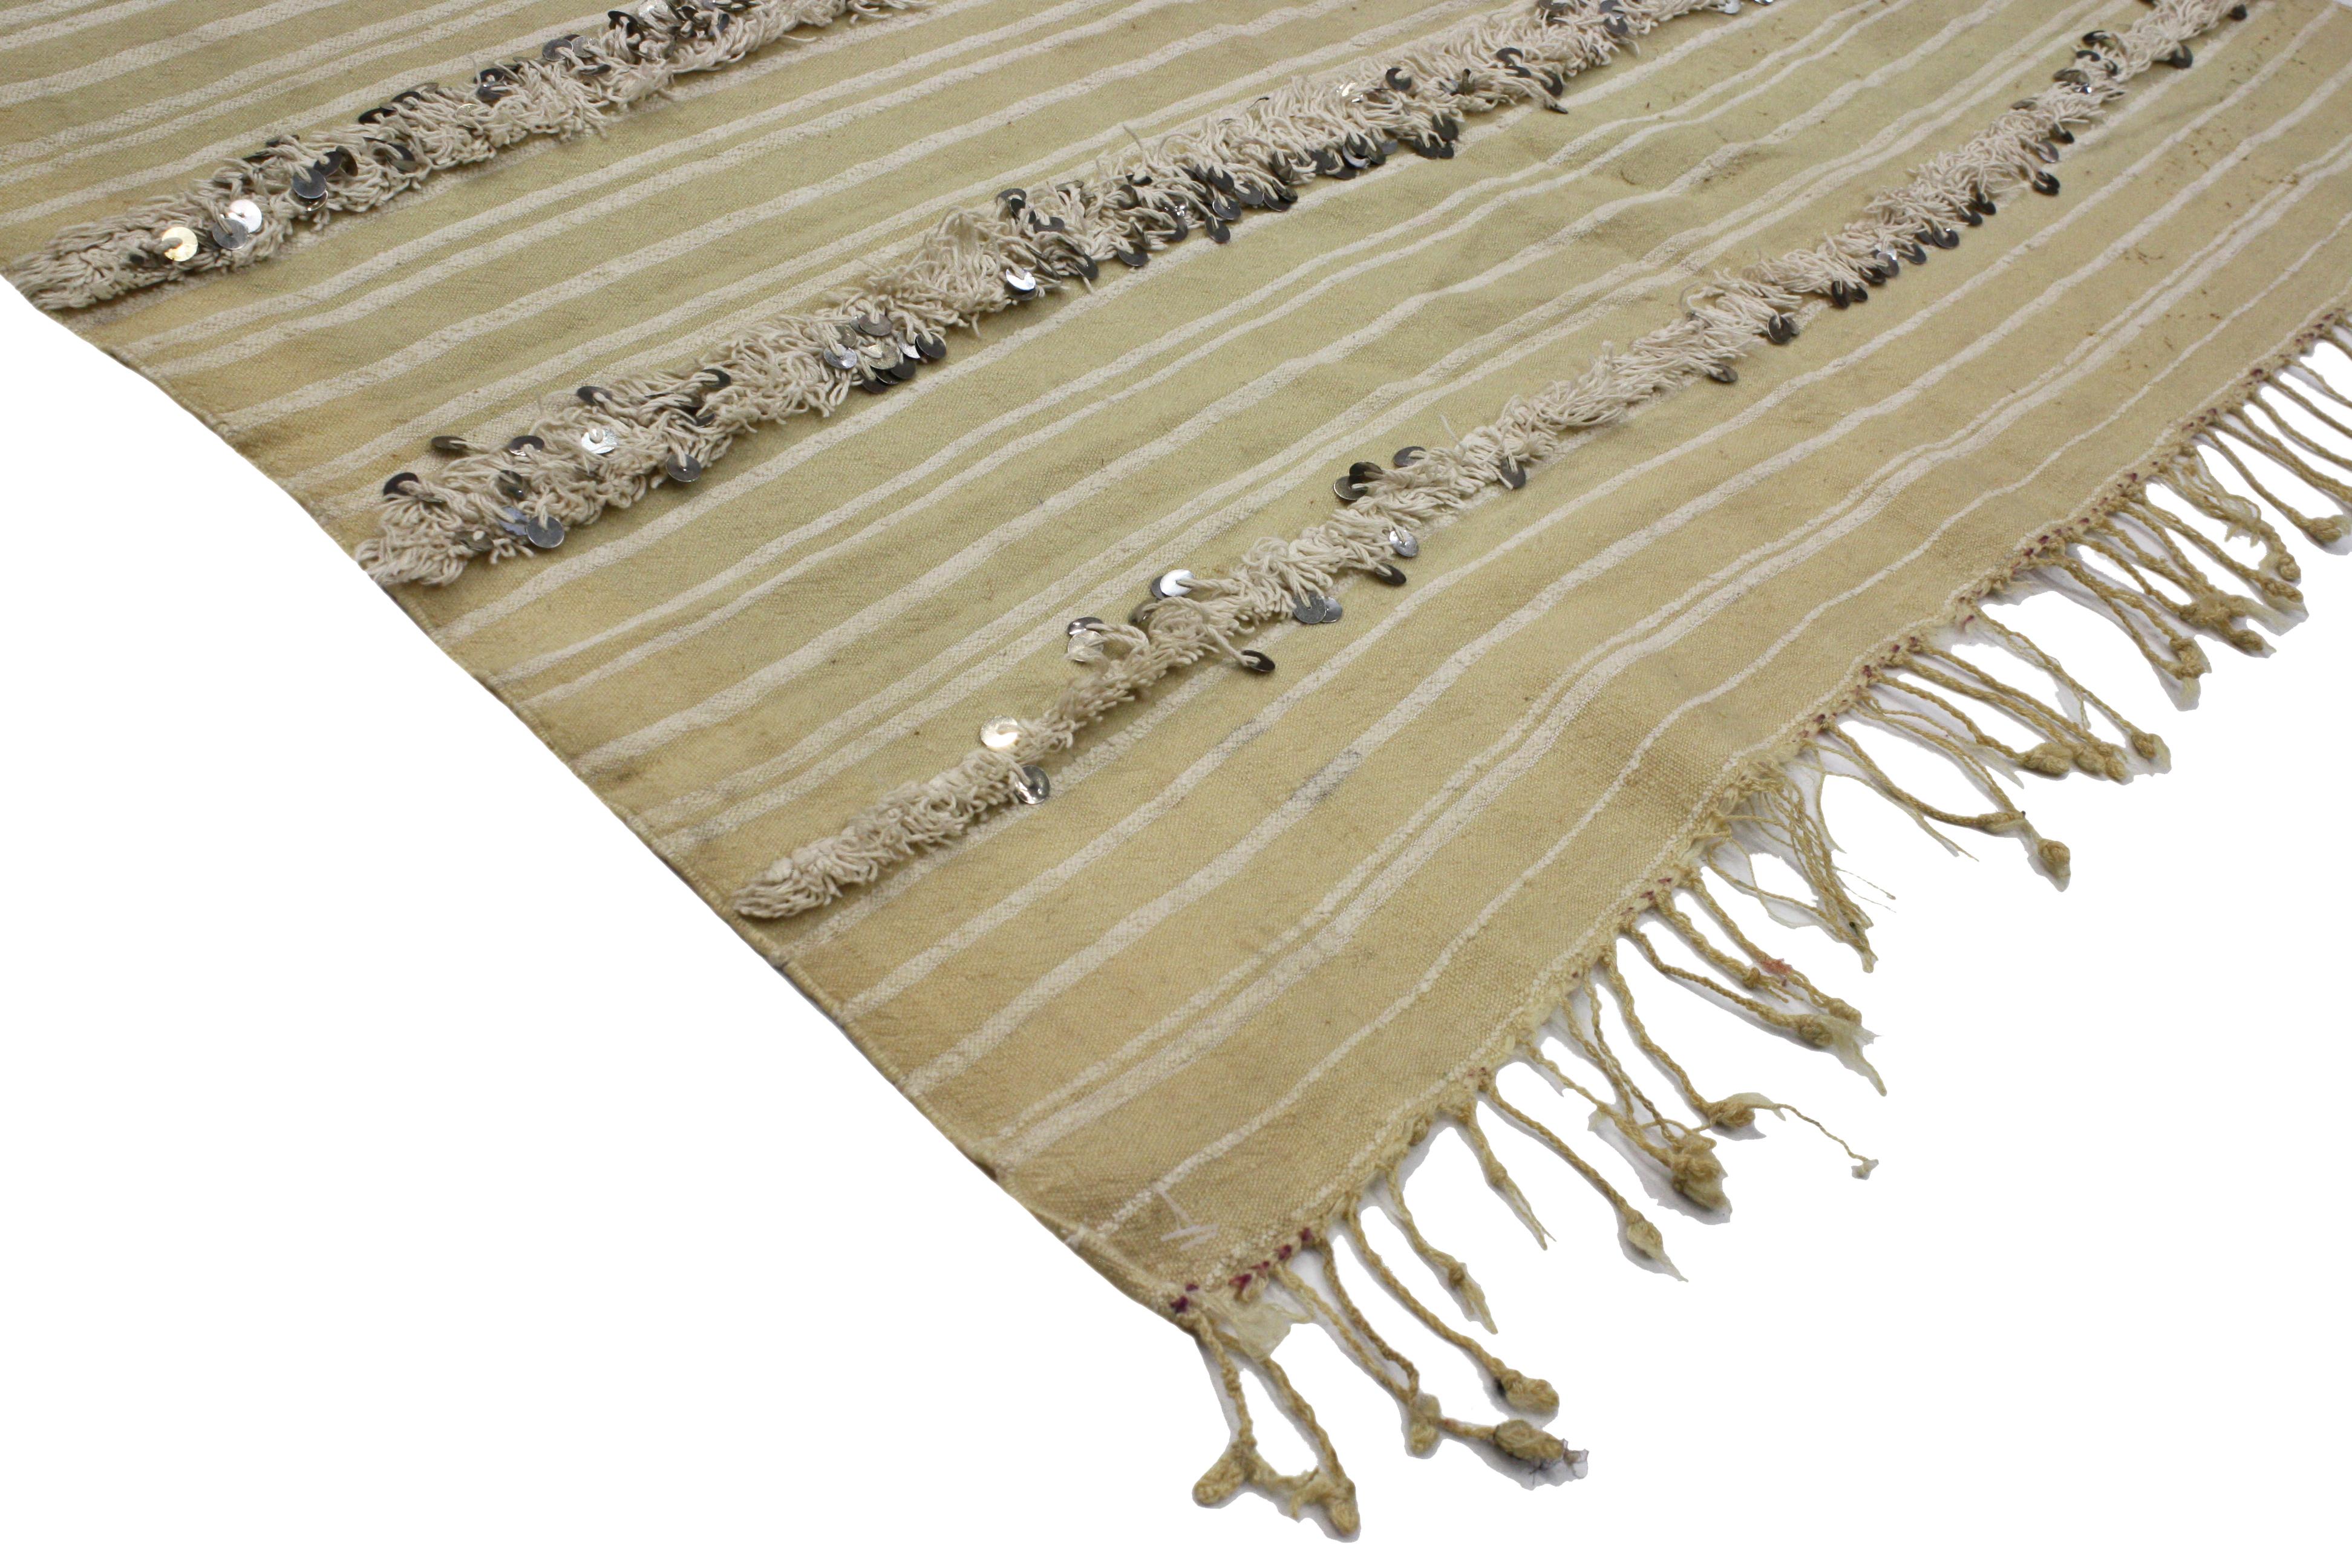    20326 Vintage Moroccan Wedding Blanket, Berber Handira Tamizart 03'01 x 5'00. This handwoven wool vintage Moroccan Wedding Blanket also known as a Berber Handira features rows of fluffy fringe embellished with paillette sequins. Generally woven